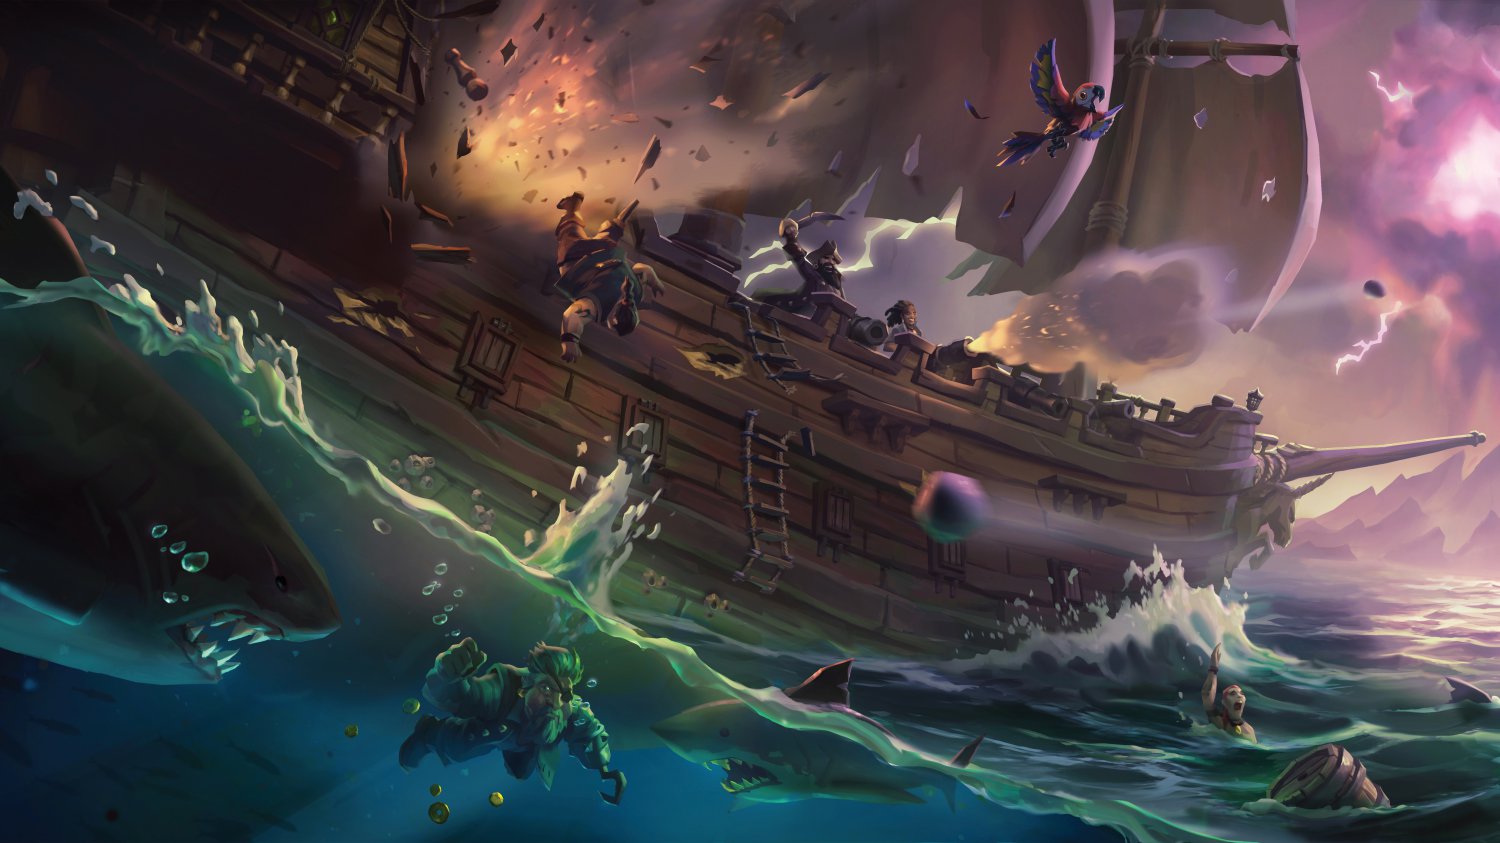 Sea of Thieves  Game 18"x28" (45cm/70cm) Poster